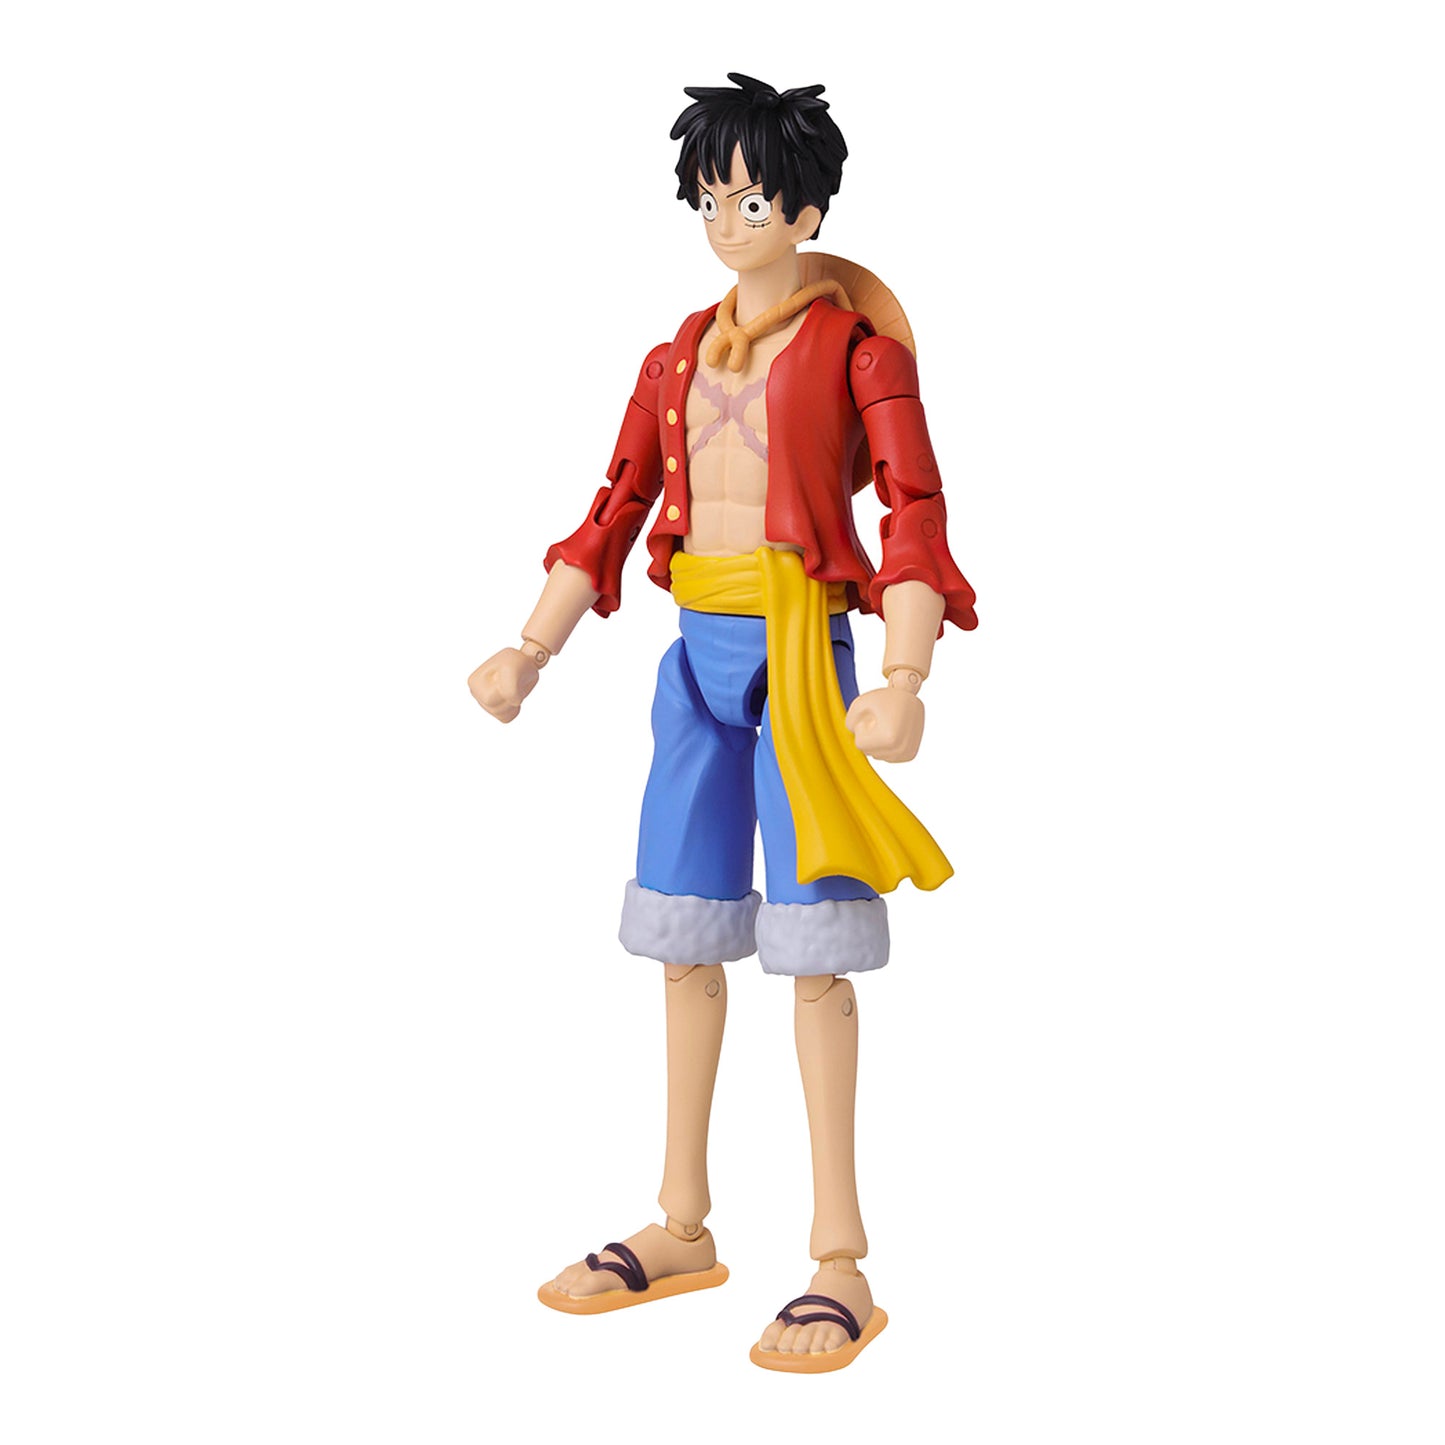 BANDAI ANIME HEROES ONE PIECE 6 INCH MONKEY D. LUFFY ACTION FIGURE 2021